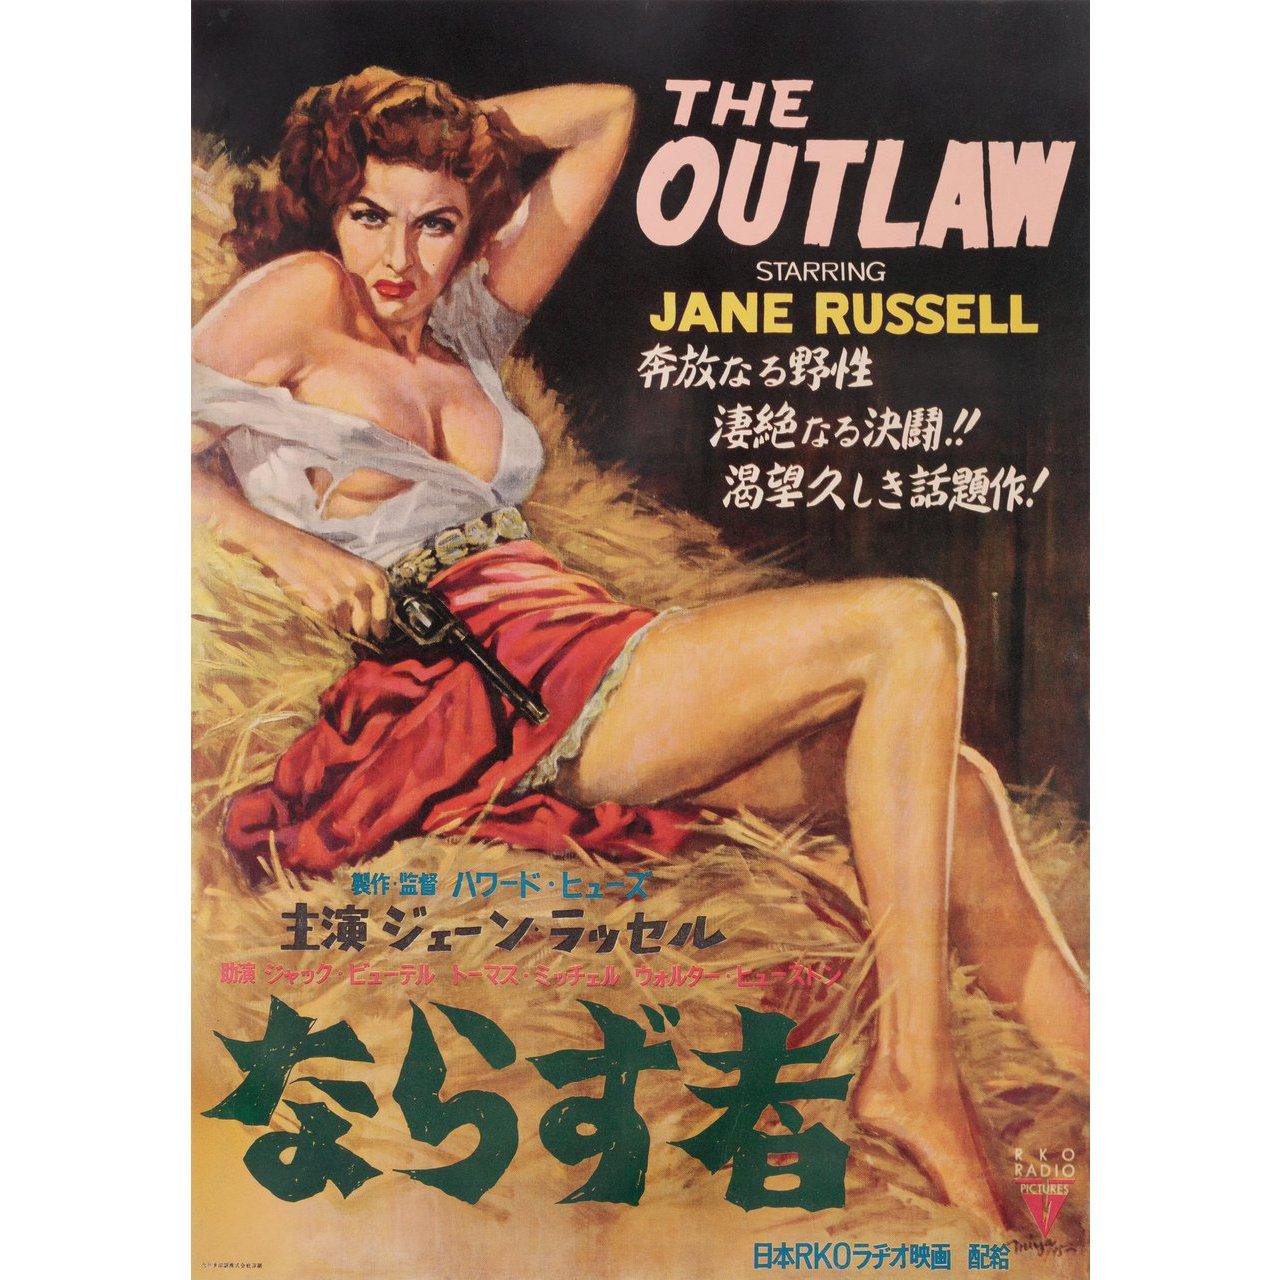 Paper The Outlaw 1952 Japanese B2 Film Poster For Sale